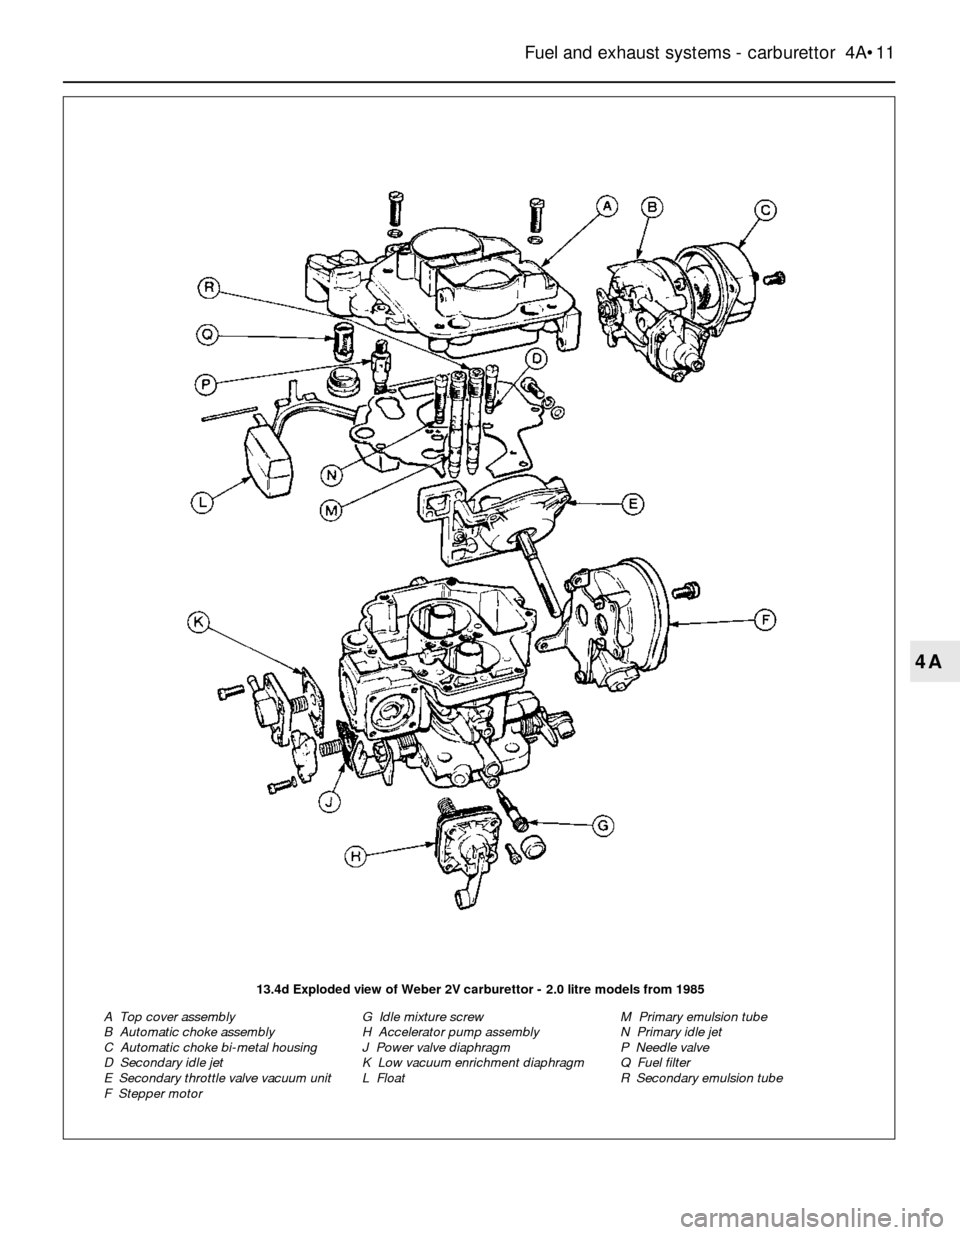 FORD SIERRA 1985 1.G Fuel And Exhaust Systems Carburettor User Guide Fuel and exhaust systems - carburettor  4A•11
4A
13.4d Exploded view of Weber 2V carburettor - 2.0 litre models from 1985
A  Top cover assembly
B  Automatic choke assembly
C  Automatic choke bi-meta